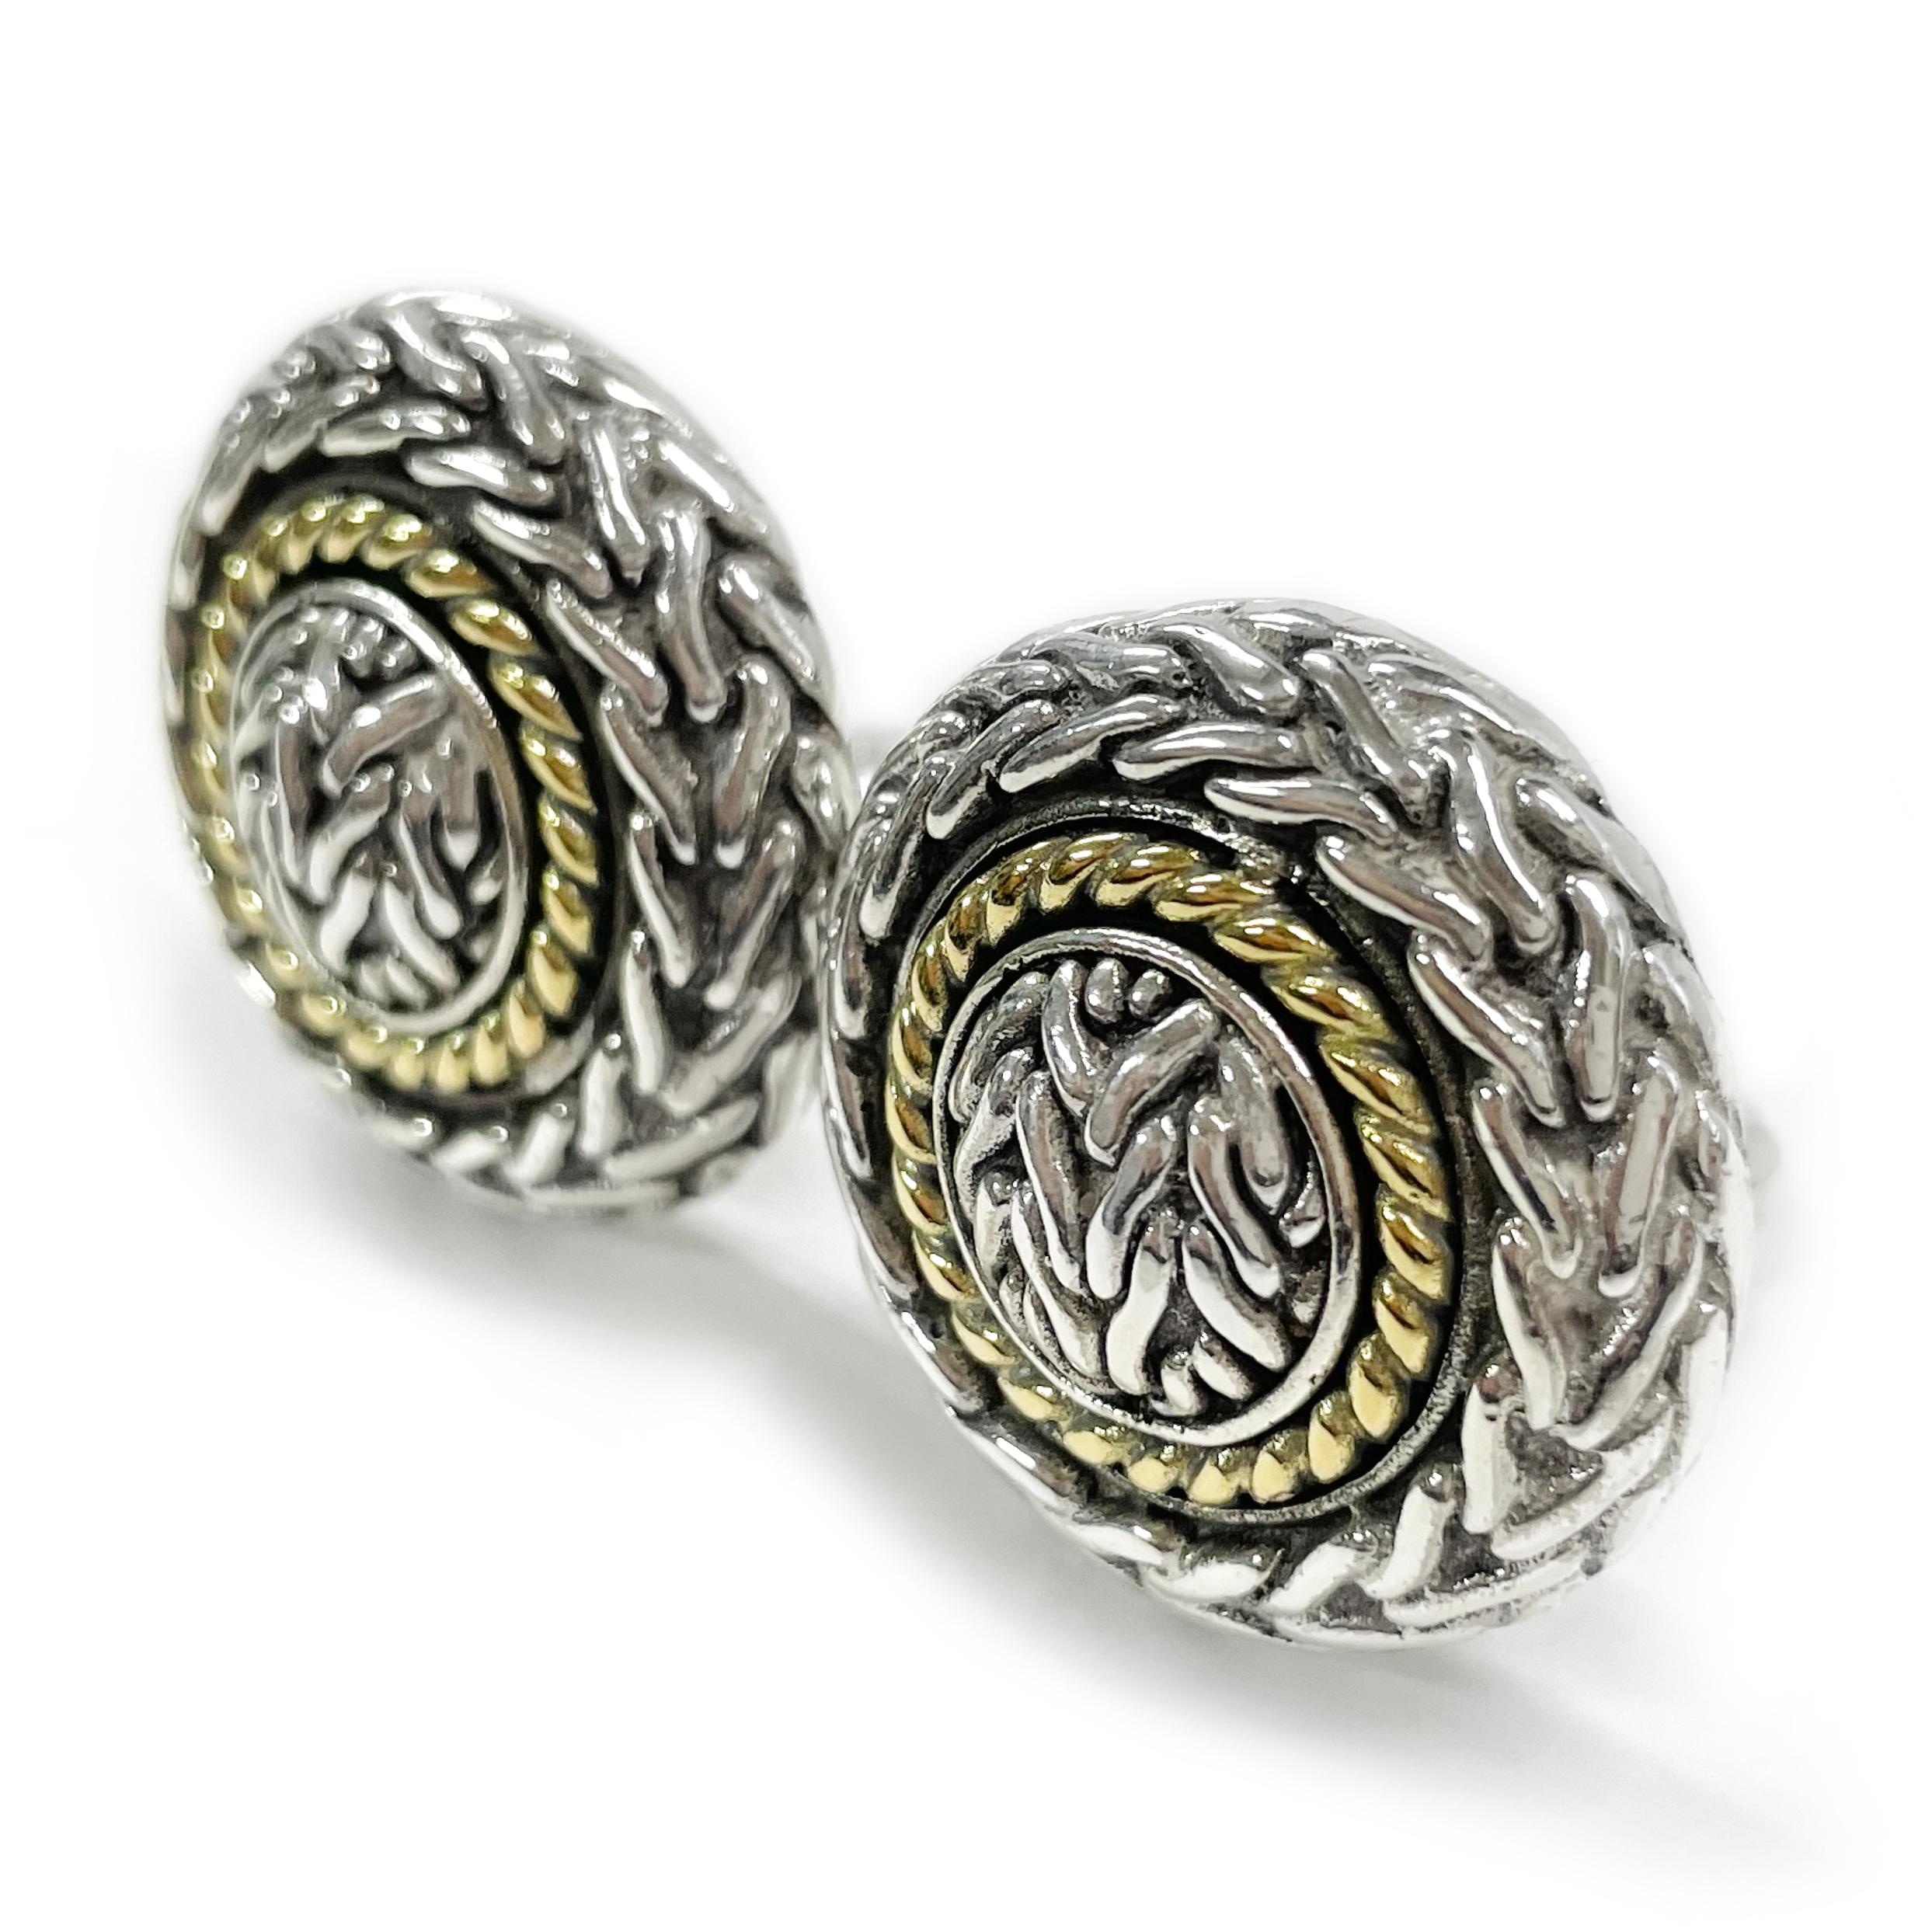 John Hardy Wheat Clip-On Earrings. Designer John Hardy style is evident on these classic earrings. The signature wheat and cable texture is throughout the front of the dome-shaped earrings. The majority of the earring is in sterling silver with a